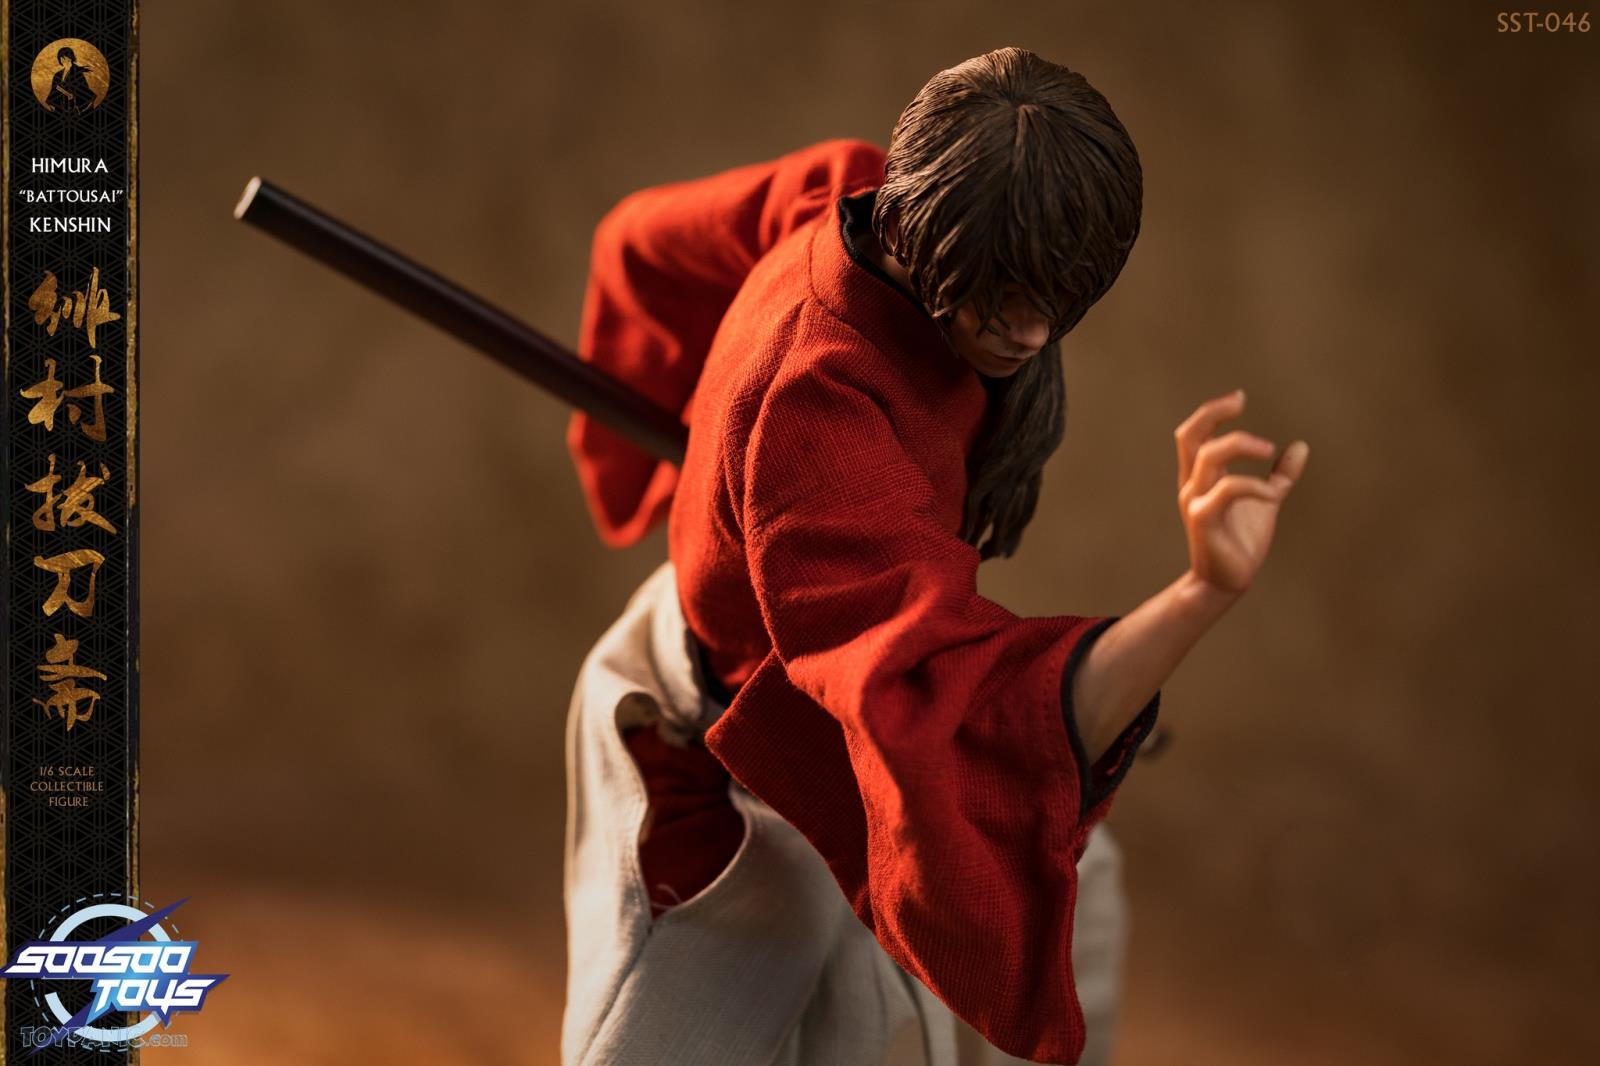 Japanese - NEW PRODUCT: 1/6 scale Rurouni Kenshin Collectible Figure from SooSooToys 712202251231PM_2000183